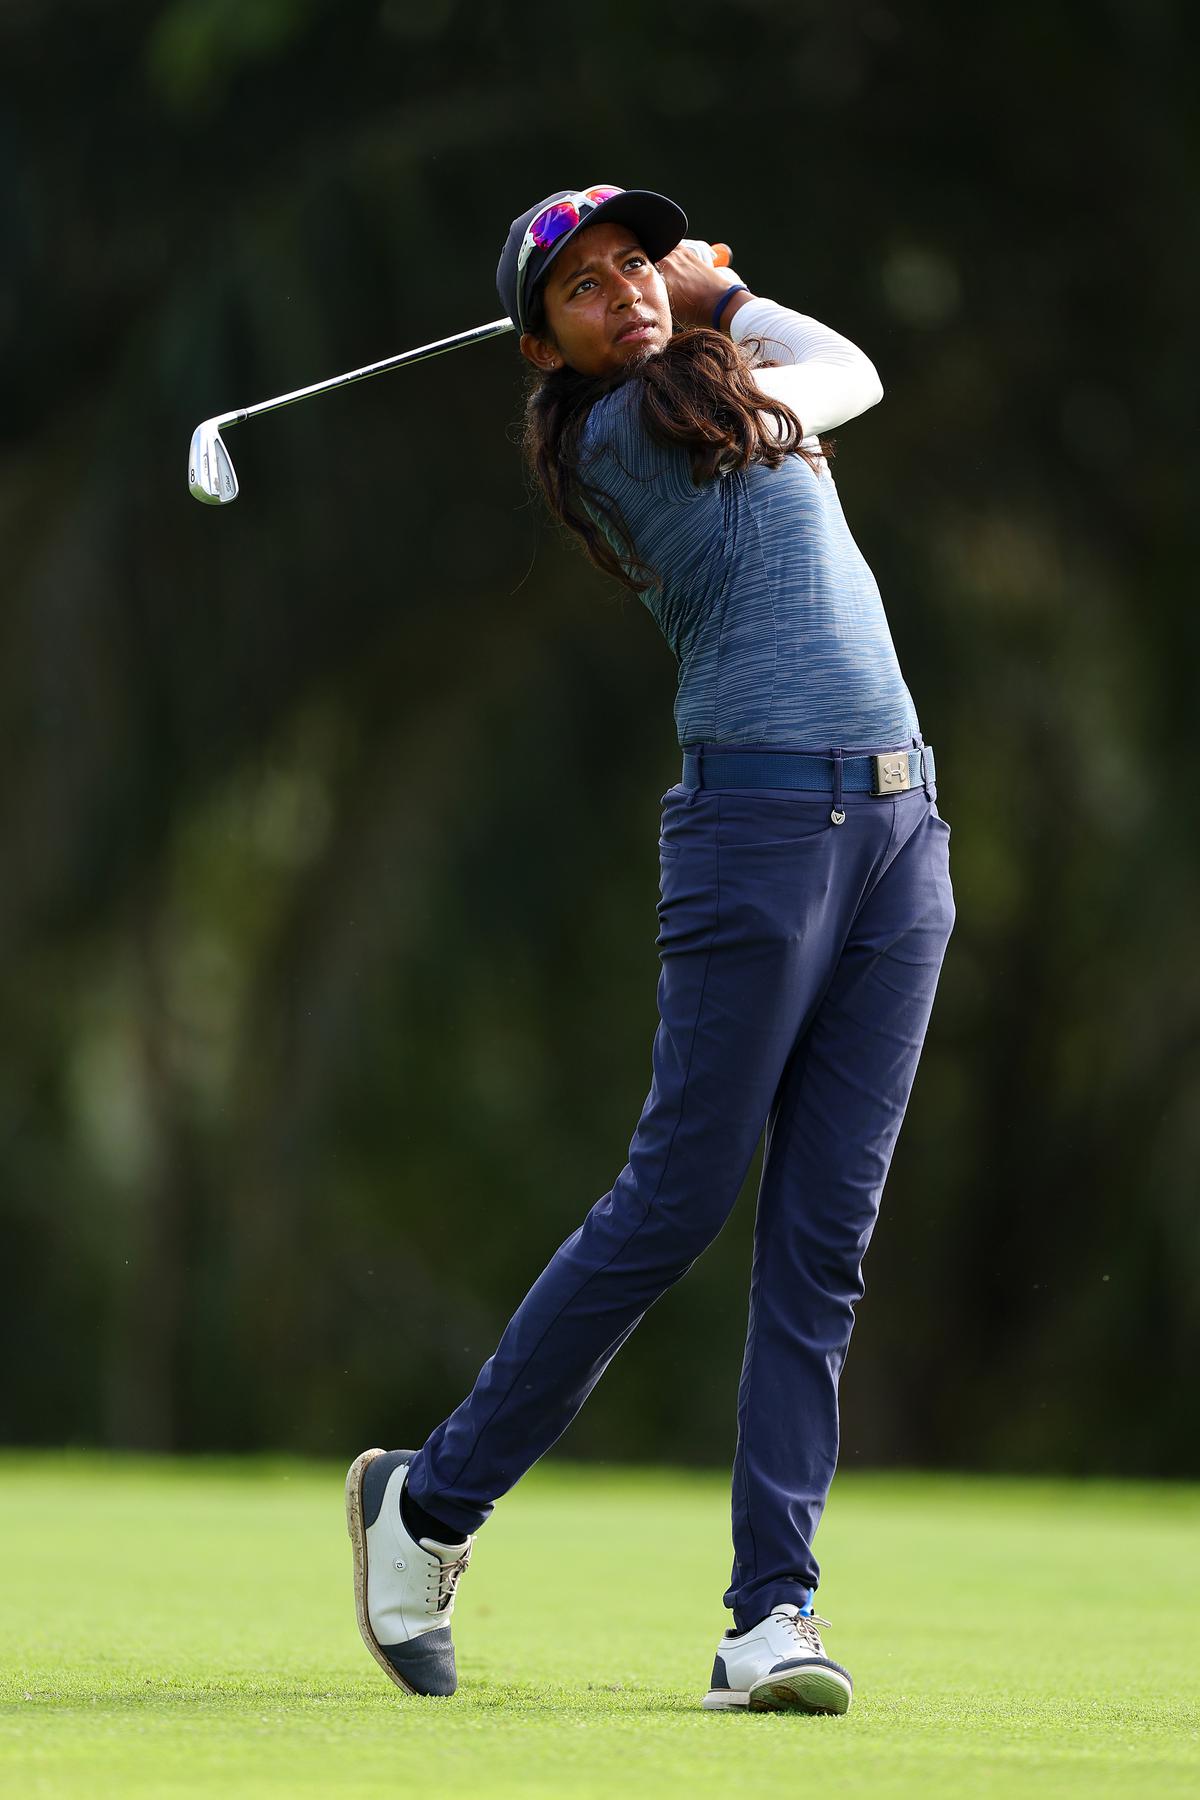 Breathe, swing, repeat: Avani says giving herself more breathing room — by respecting the golf course and staying patient —has made a big difference to her match-play. | Photo credit: Getty Images